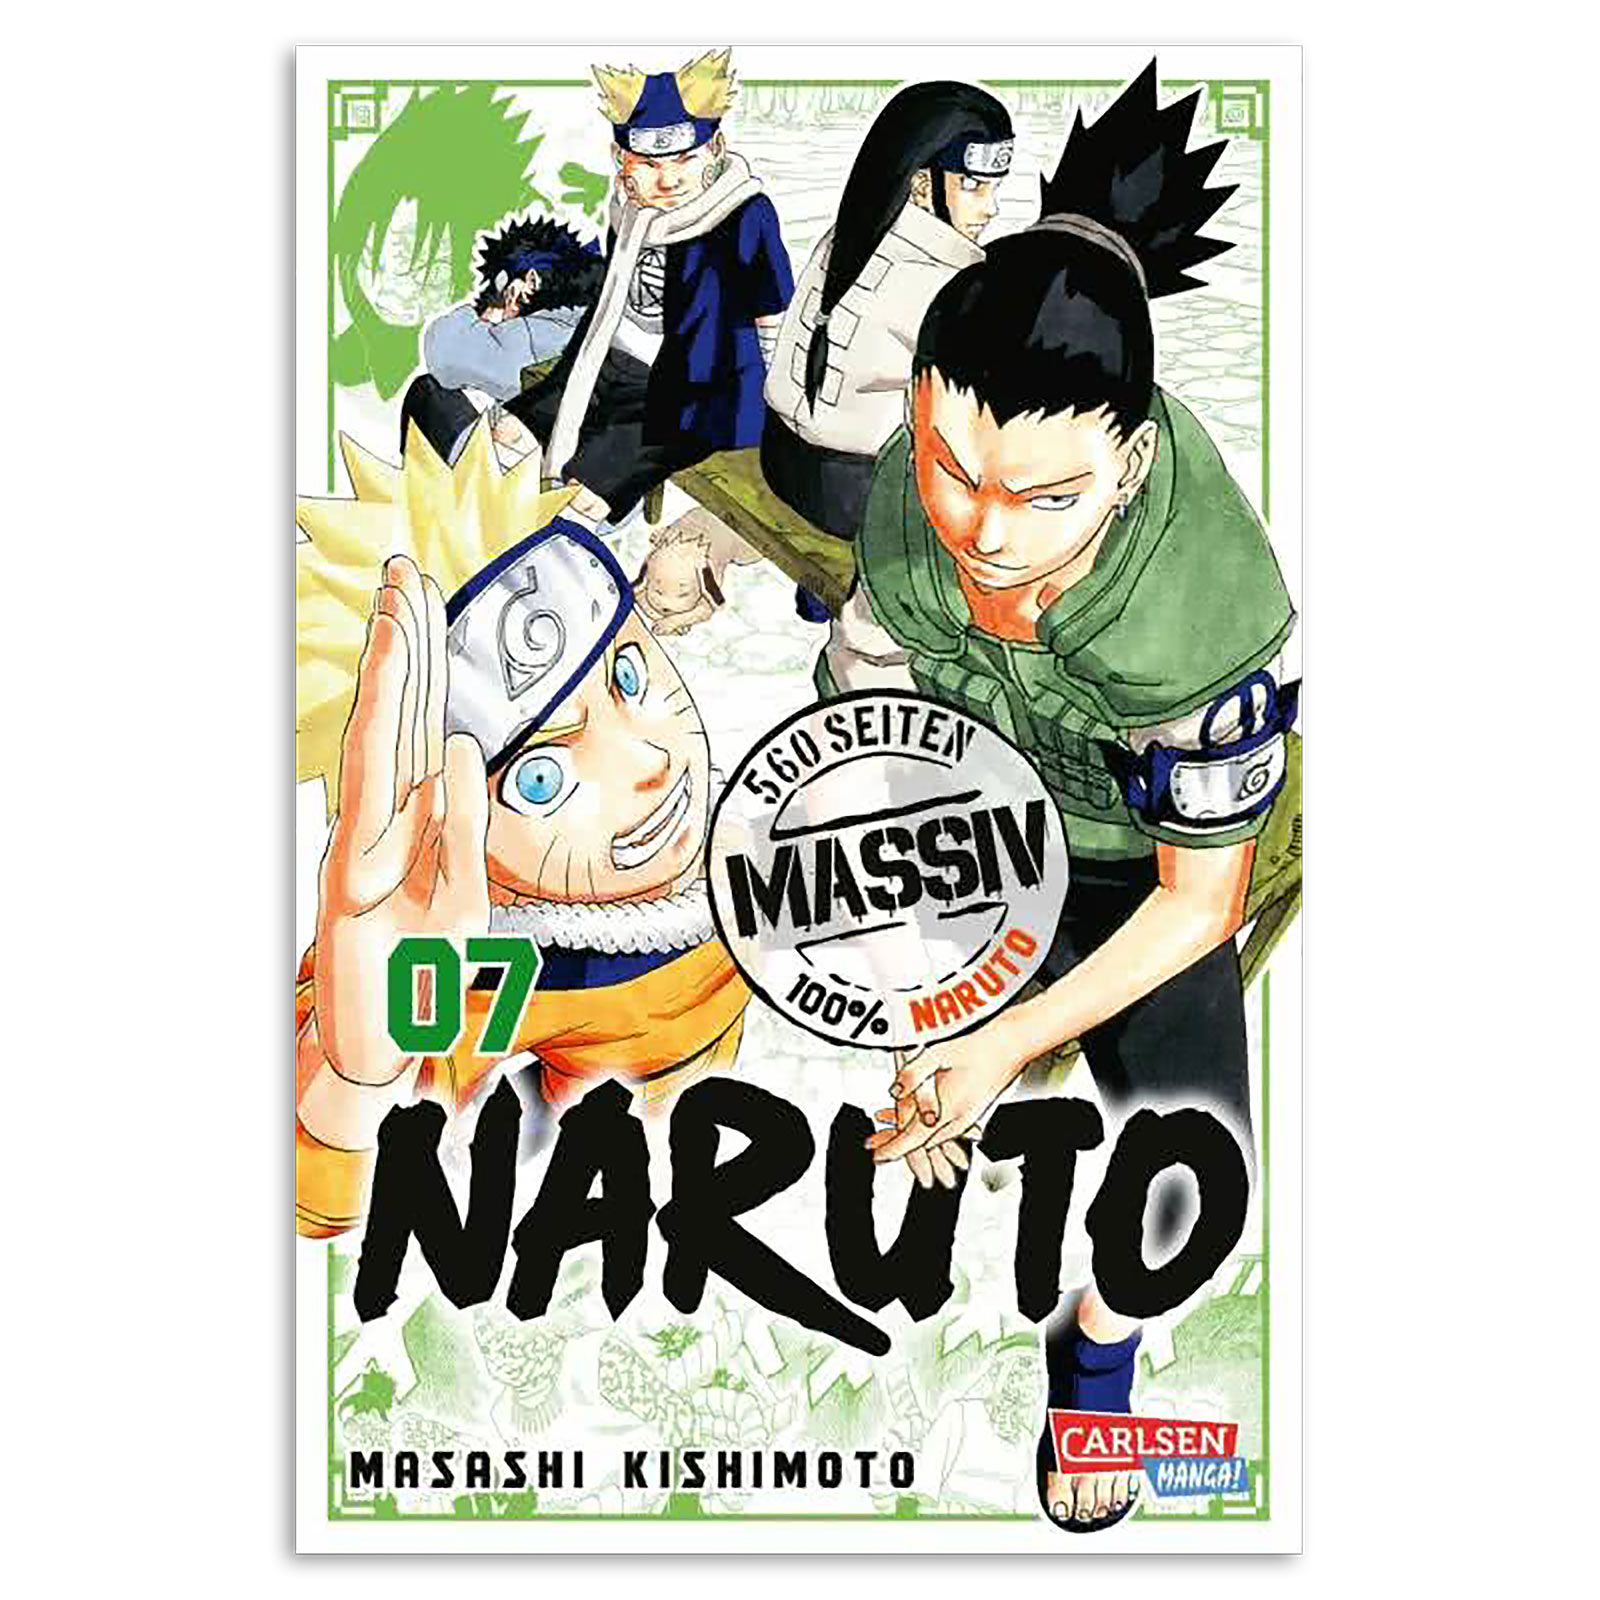 Naruto - Collected Edition 7 Paperback